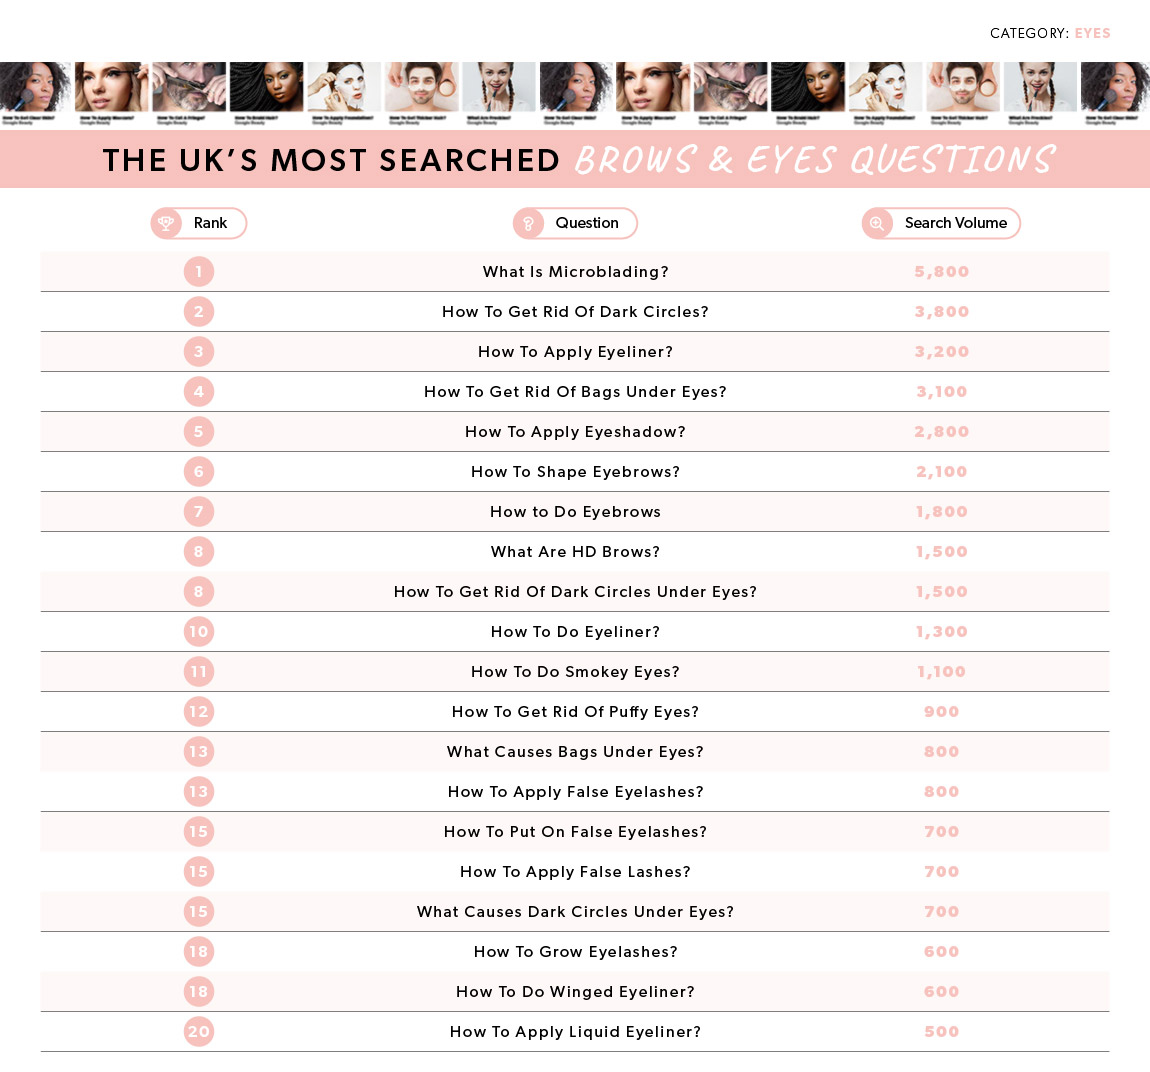 Most Searched Brows & Eyes Questions